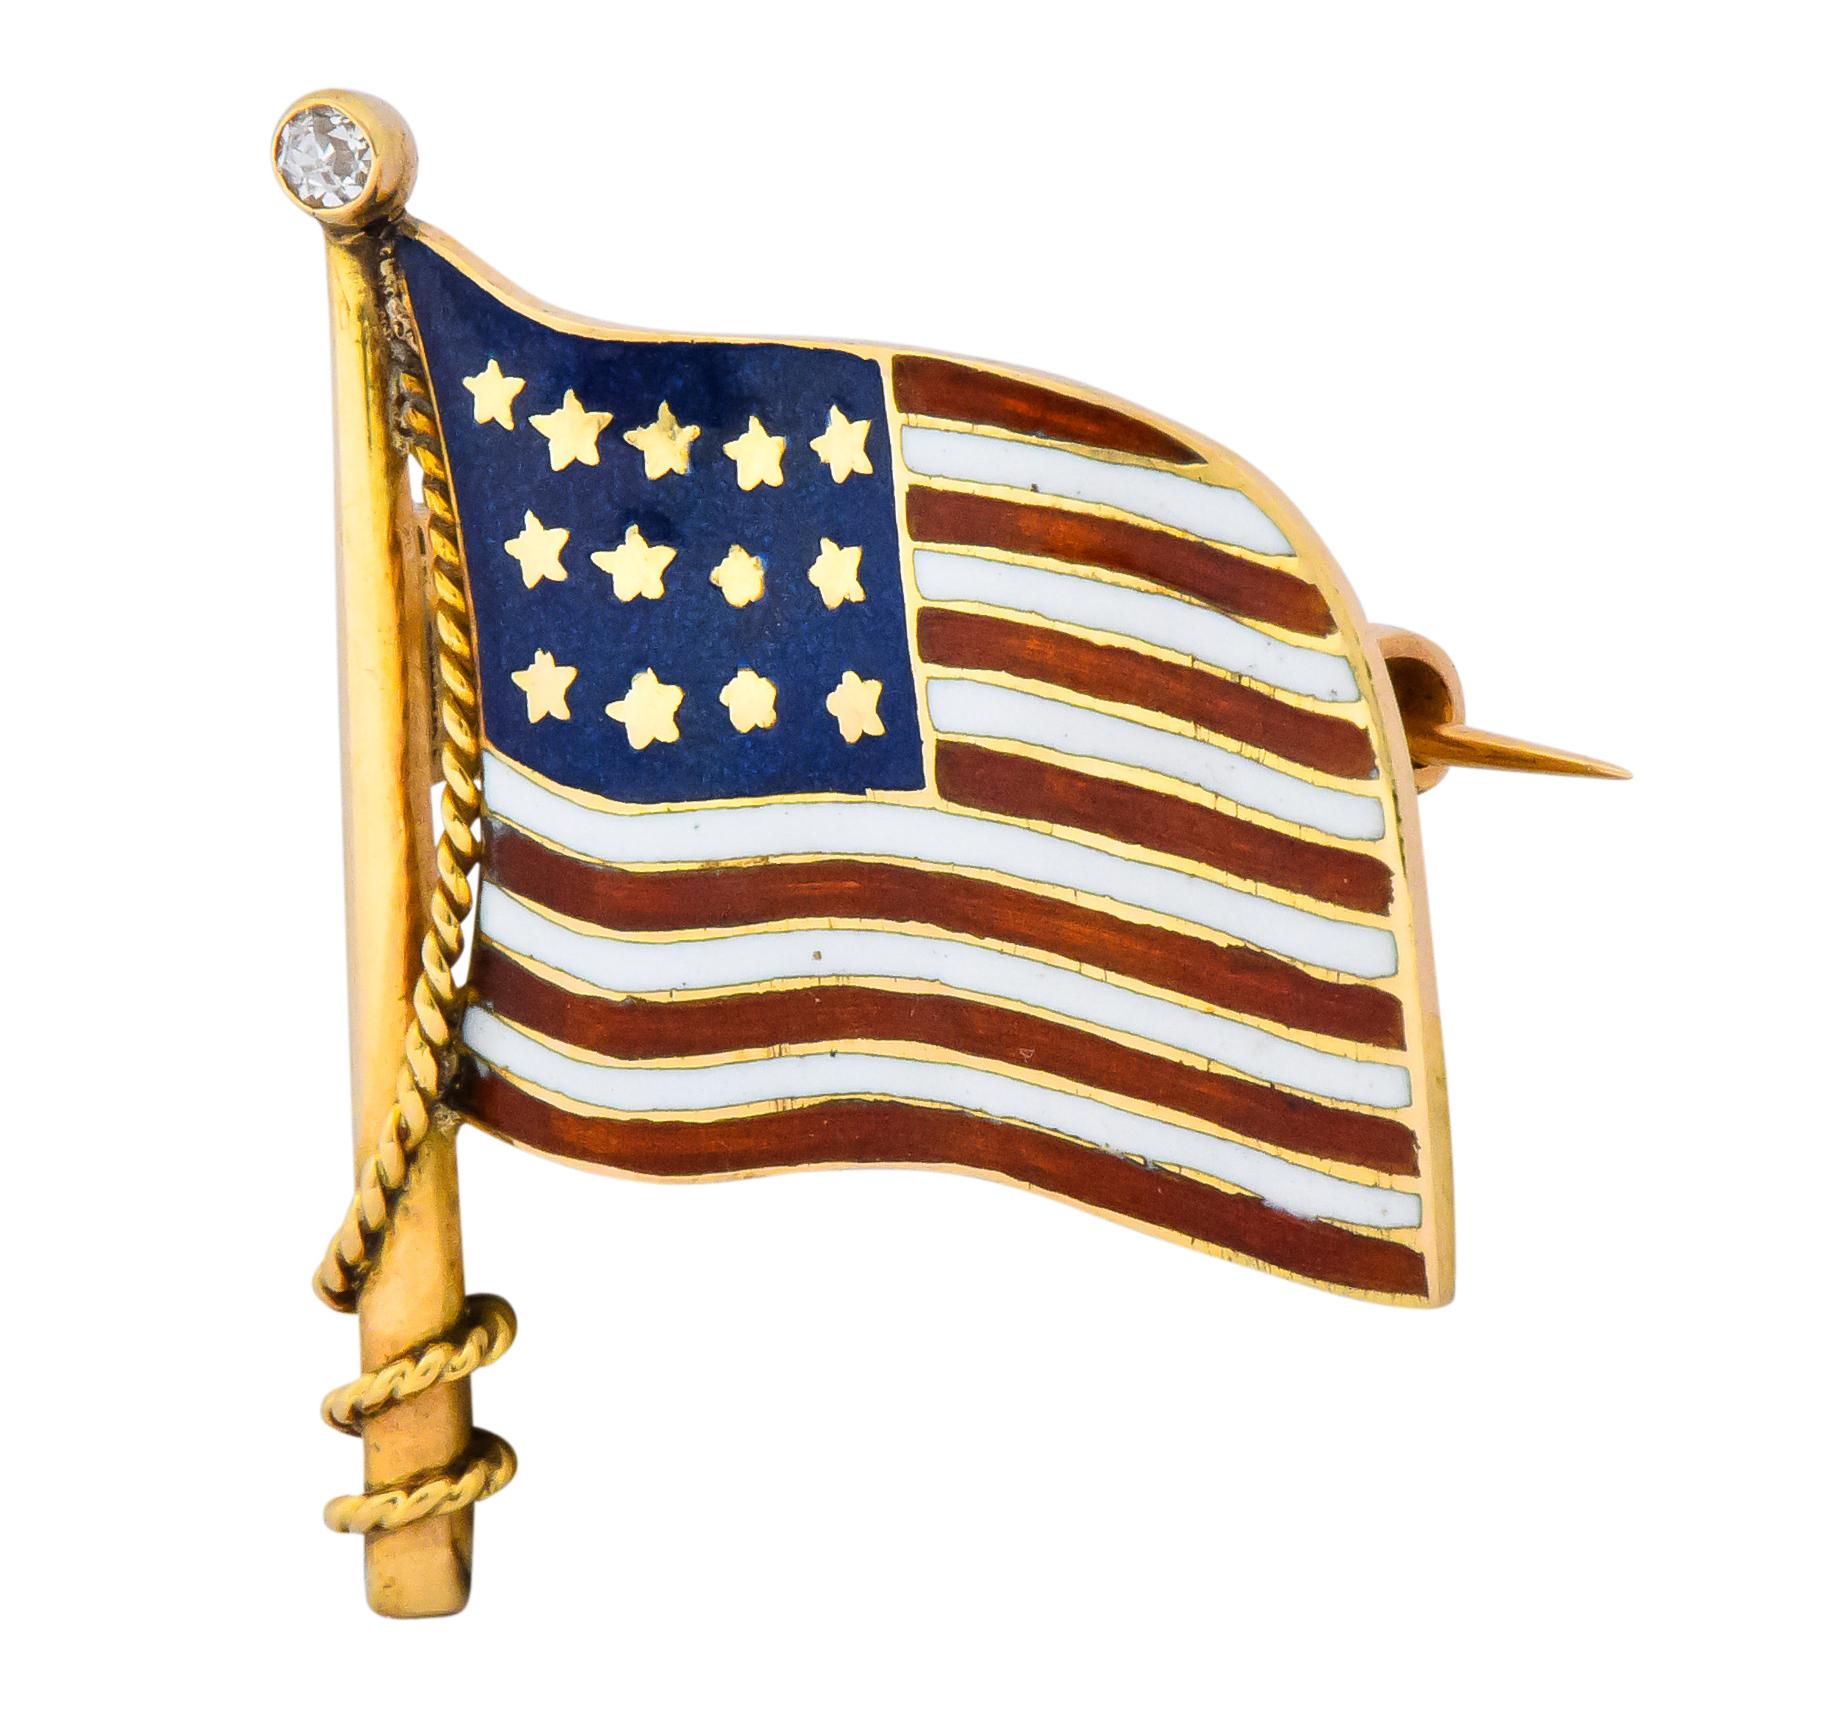 Designed as a United States Flag

Featuring red and white enamel stripes with a field of blue enamel and gold stars

Single cut diamond accent, weighing approximately 0.02 carat, eye-clean and white

Twisted gold rope detail

Tested as 14 karat